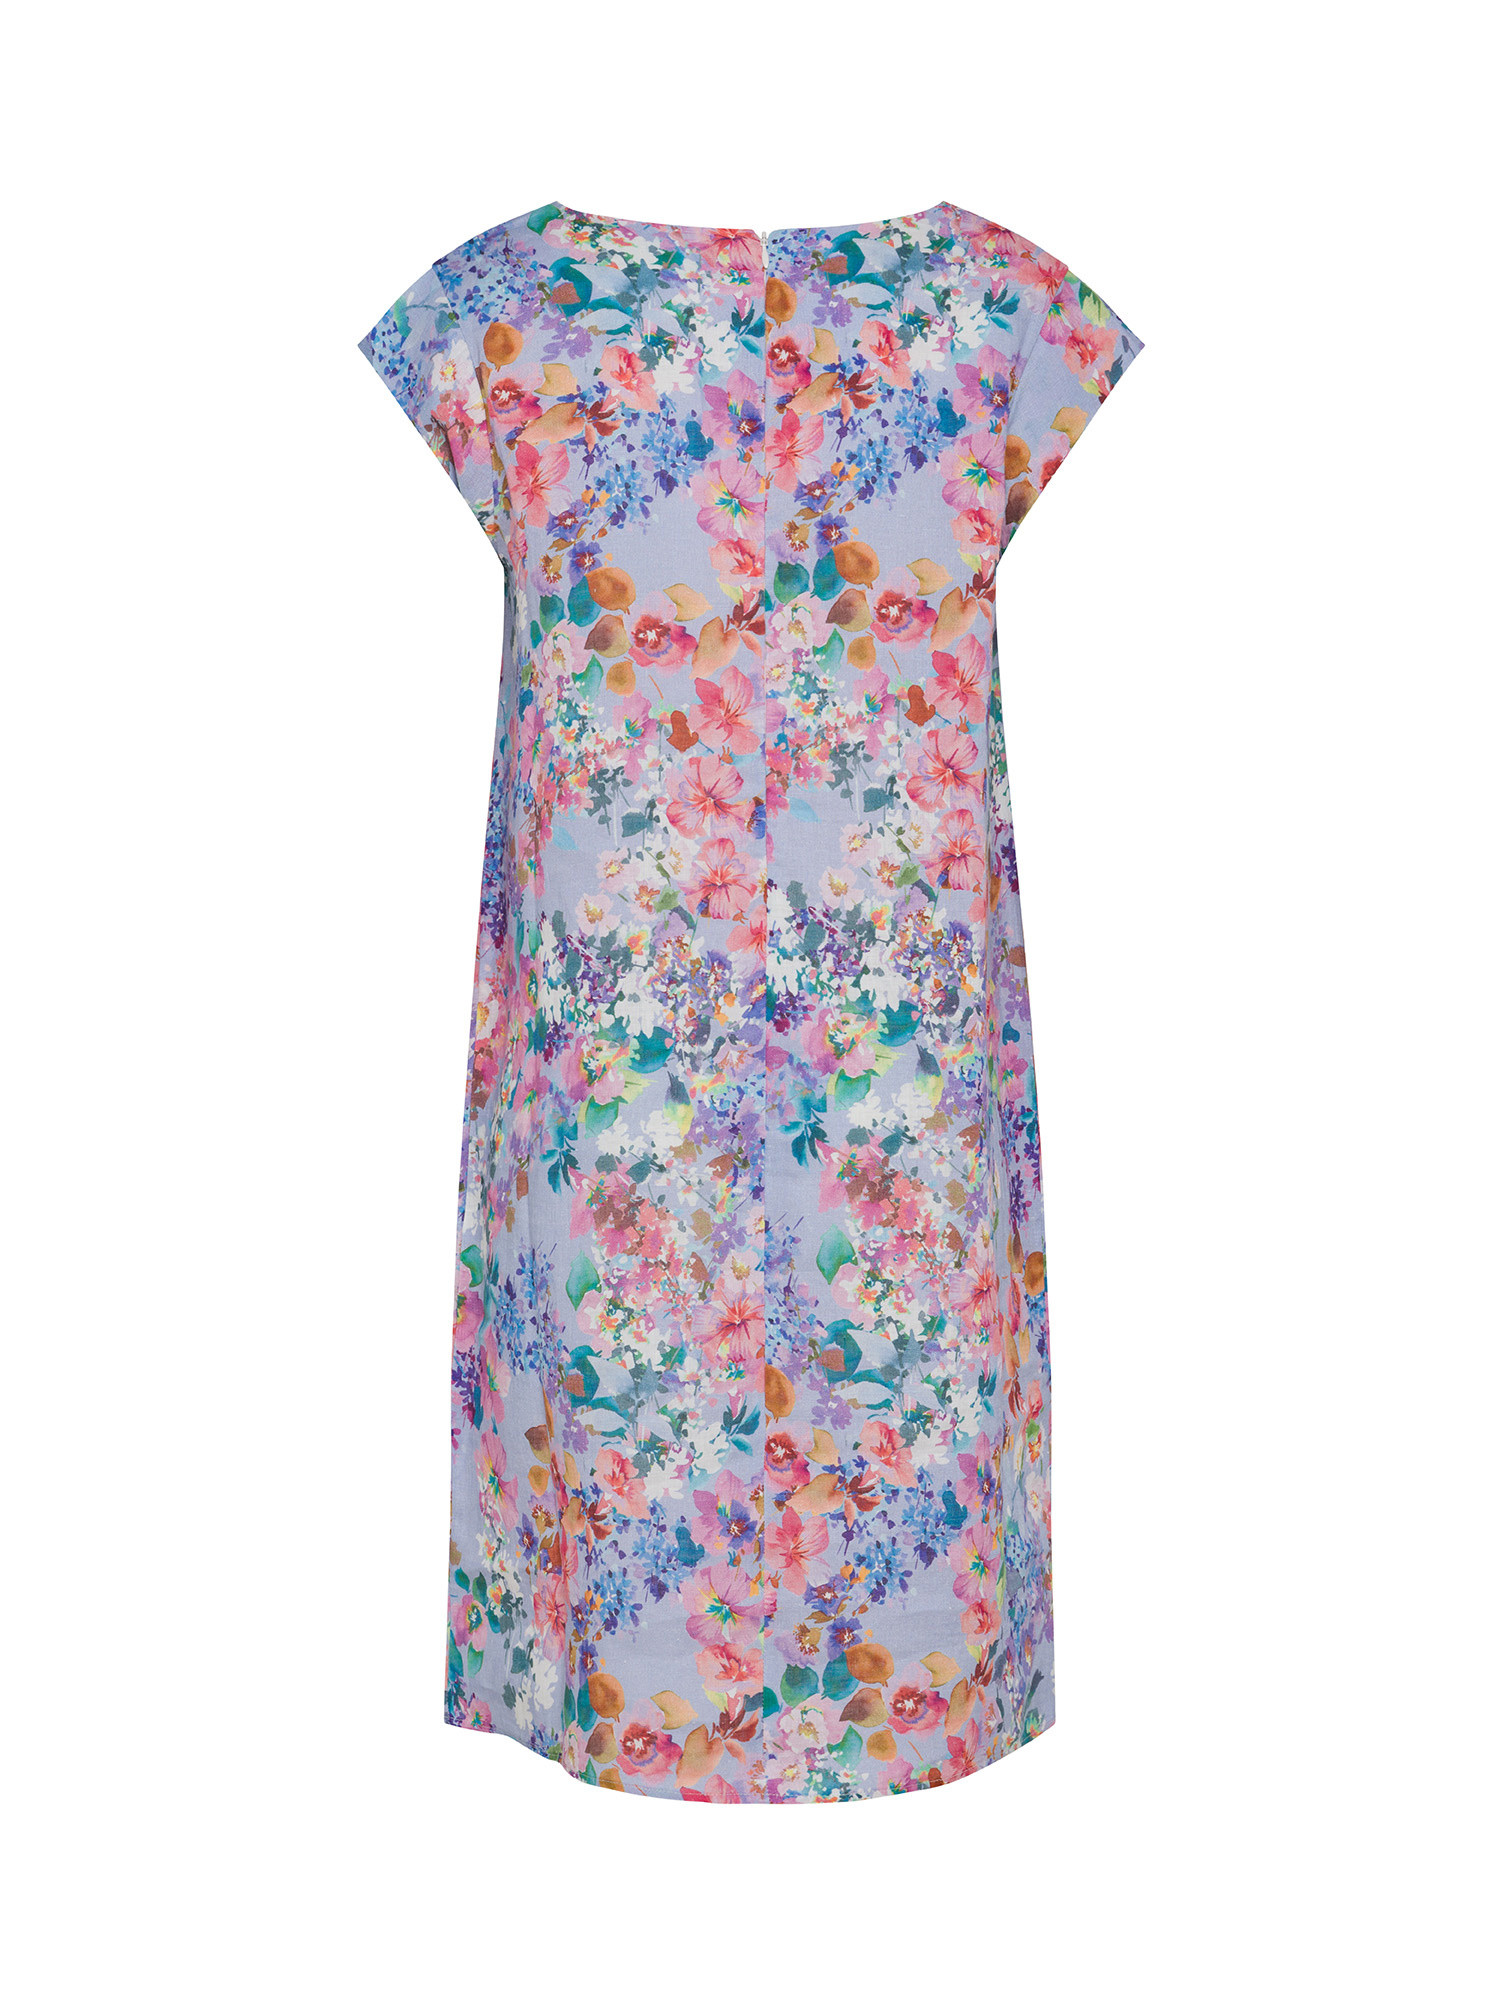 Koan - Pure linen dress with print, Purple Lilac, large image number 1